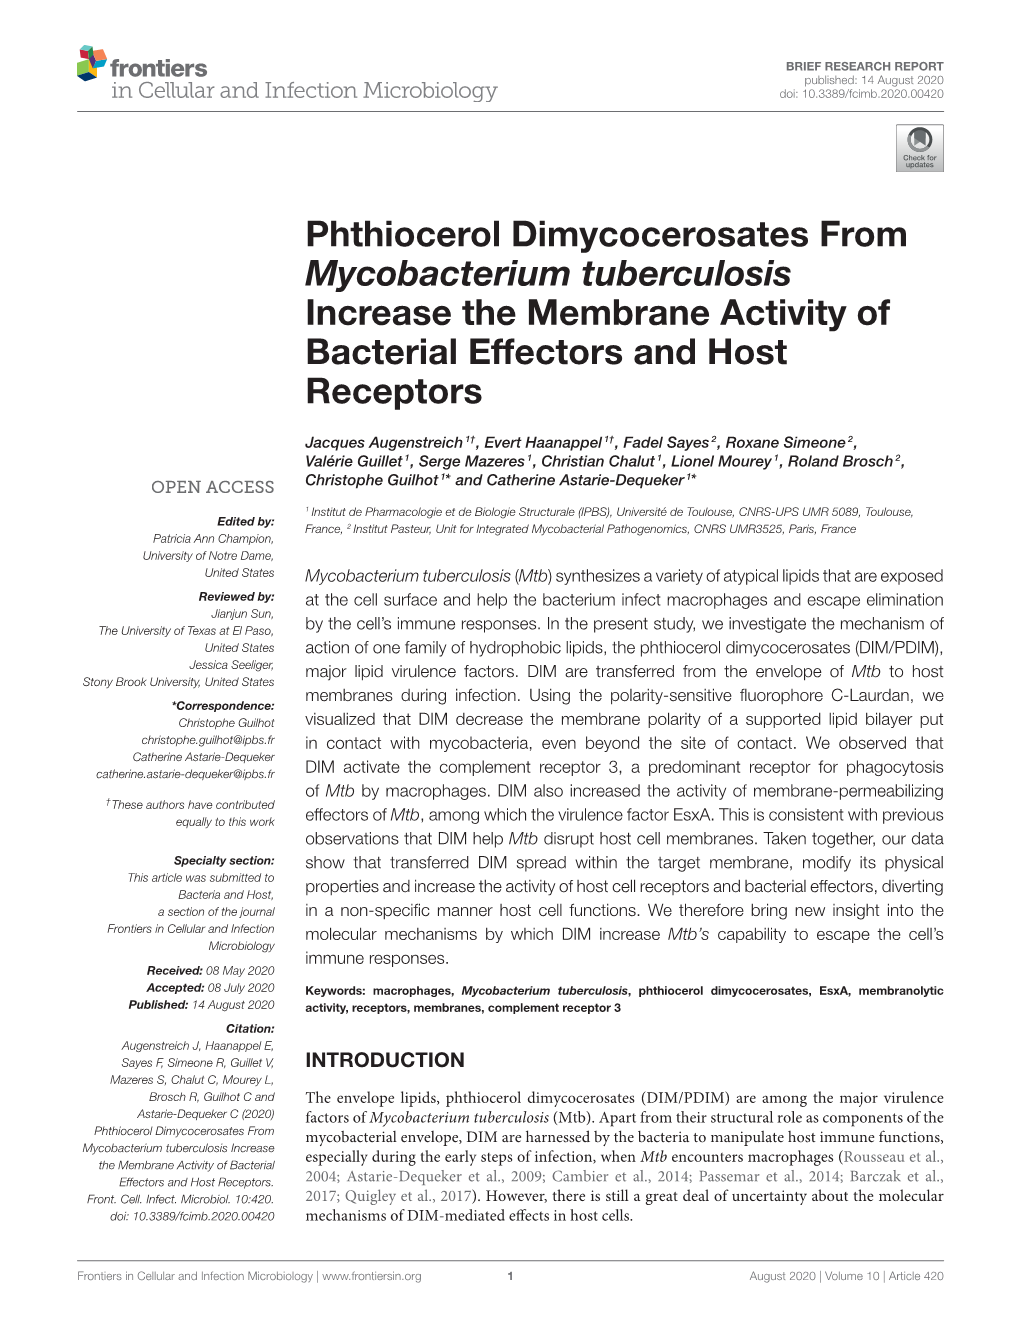 Phthiocerol Dimycocerosates from Mycobacterium Tuberculosis Increase the Membrane Activity of Bacterial Effectors and Host Receptors